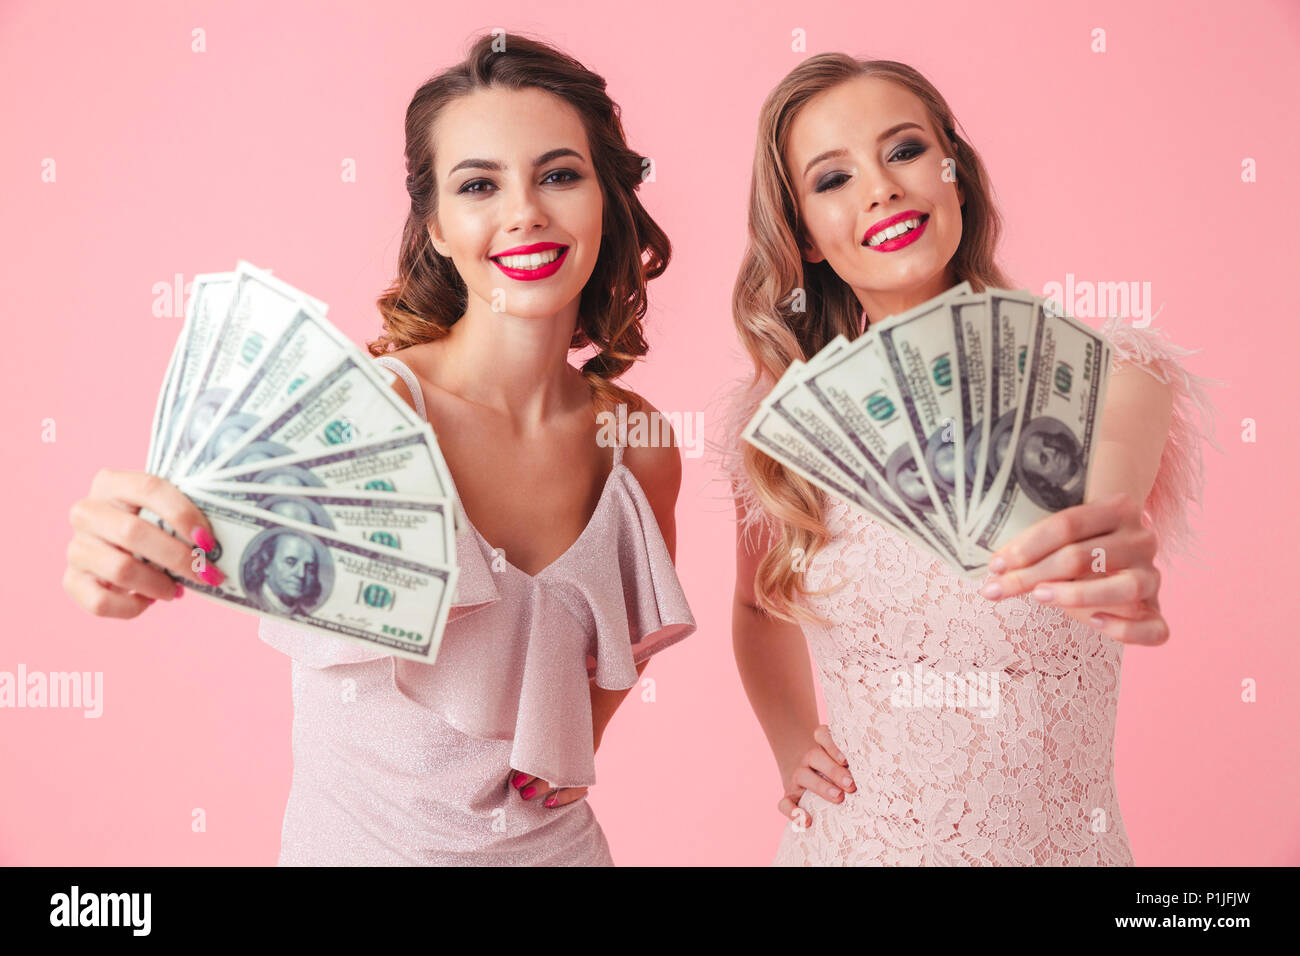 Two young gorgeous women 20s in dresses showing fan of money 100 dollar ...